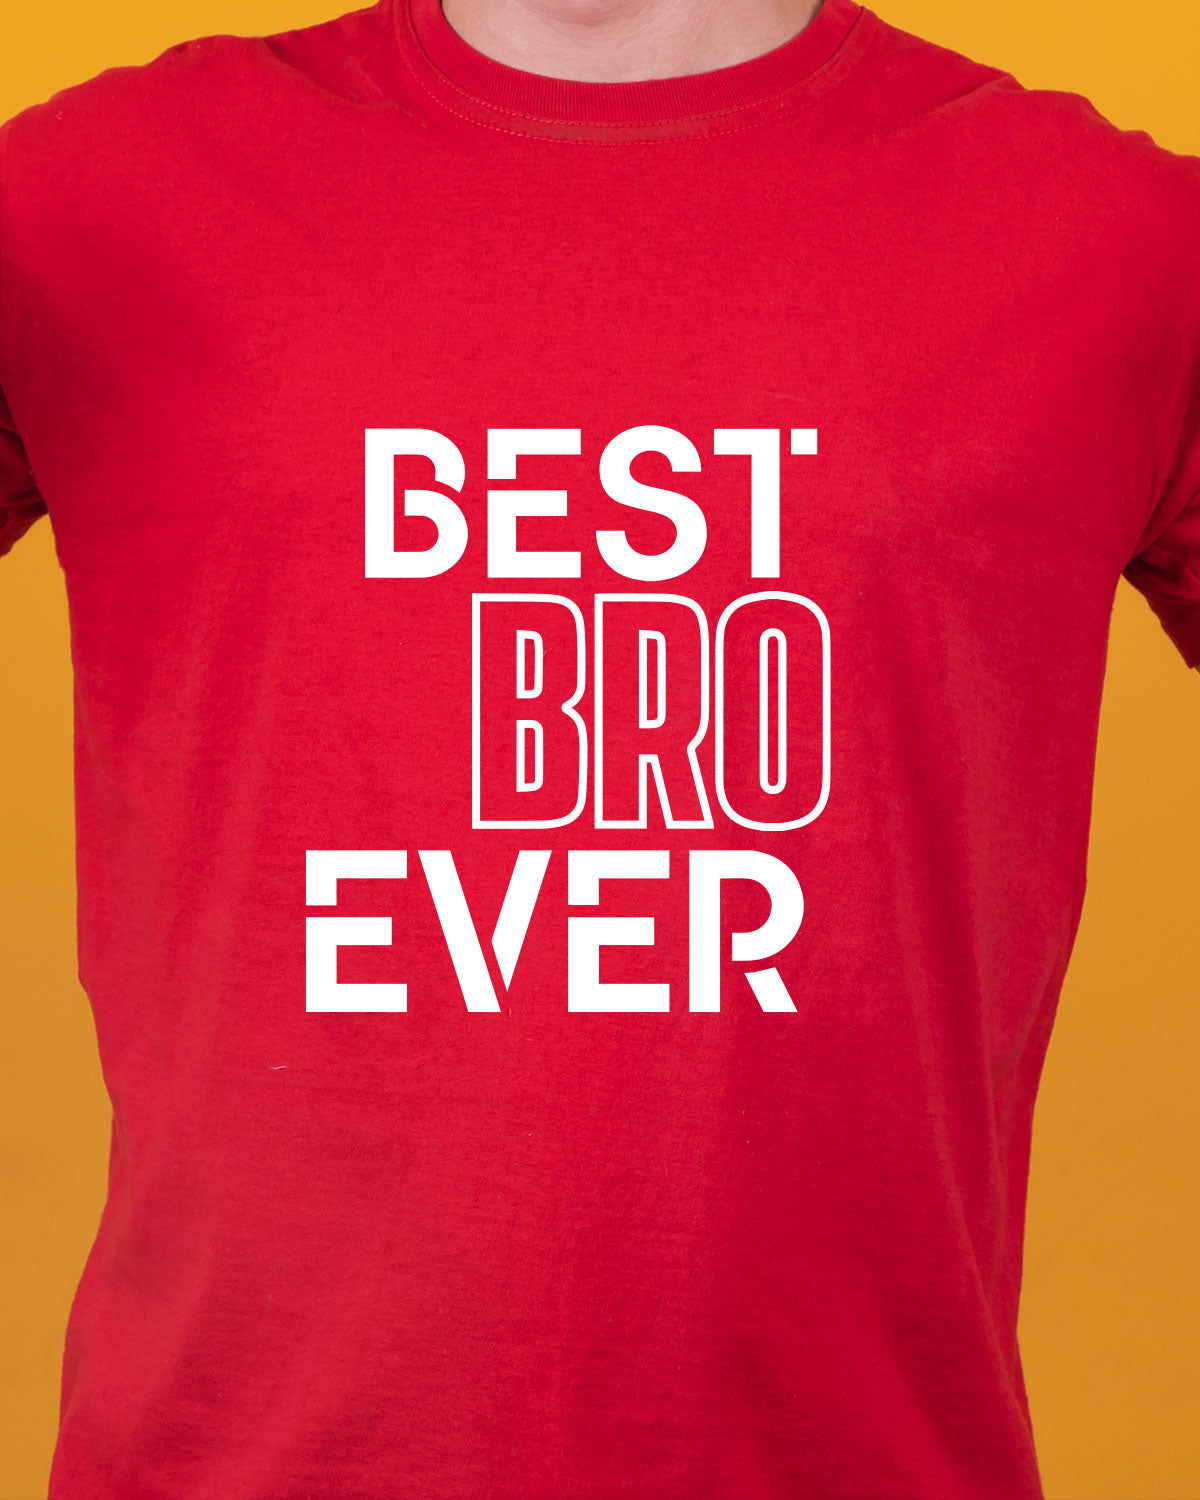 Best Bro Ever - Red T-shirt